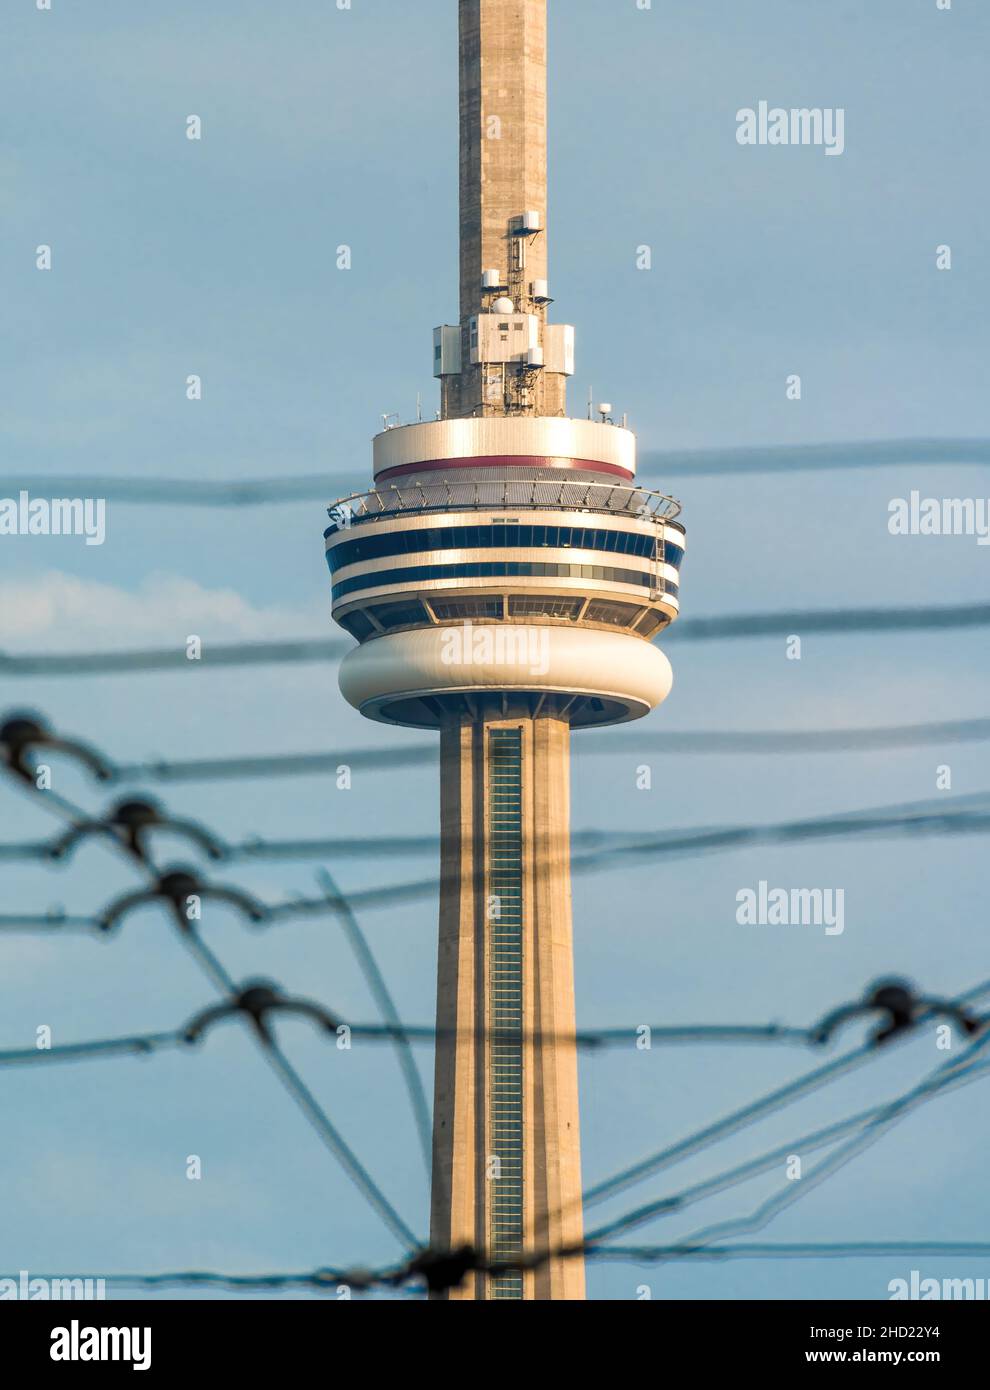 The CN Tower framed in the electric cables used by TTC streetcars. Jan. 2, 2022 Stock Photo